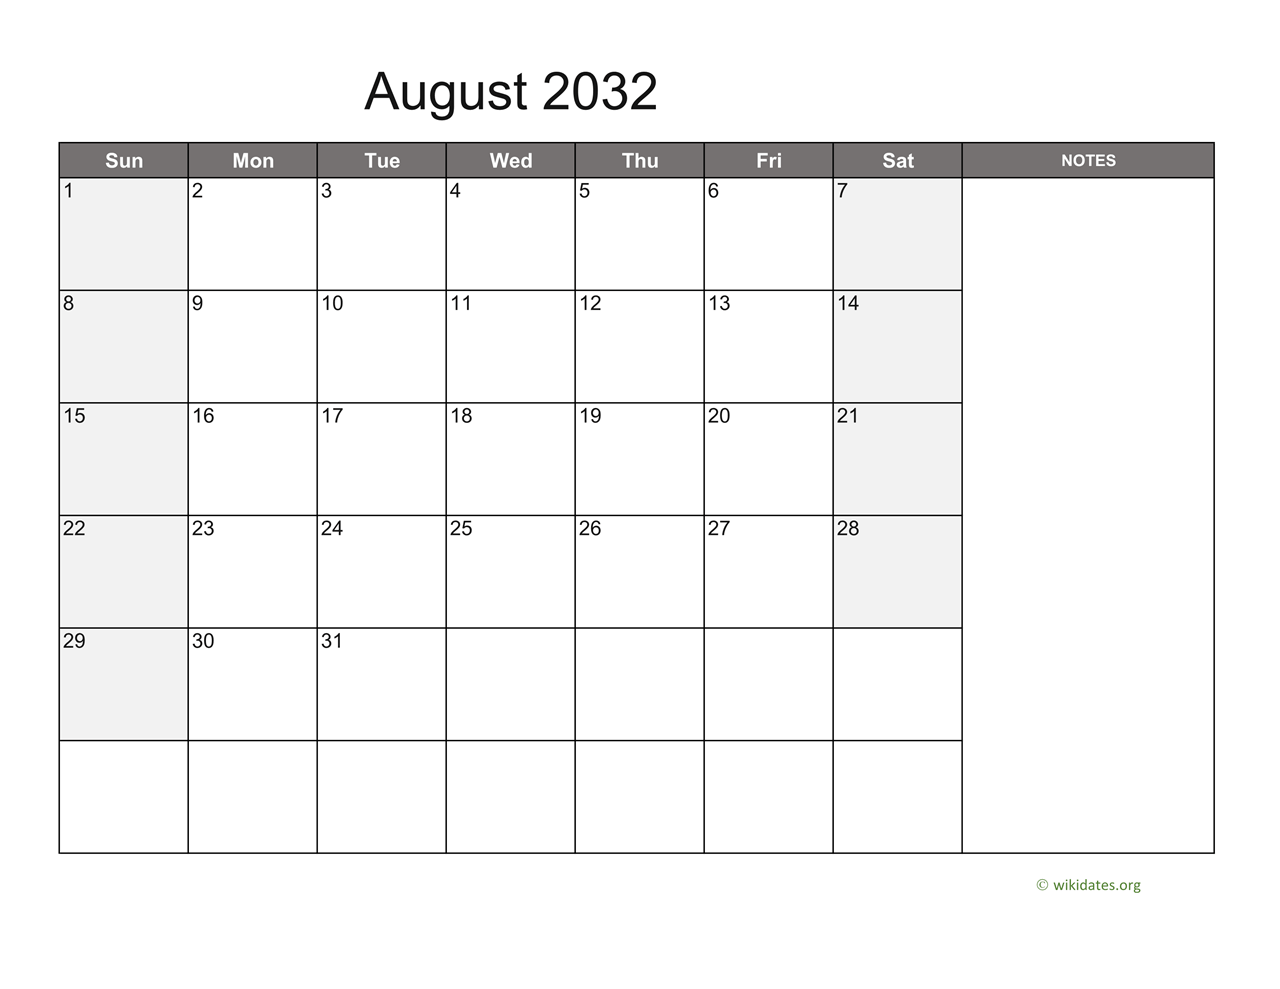 August 2032 Calendar with Notes WikiDates org